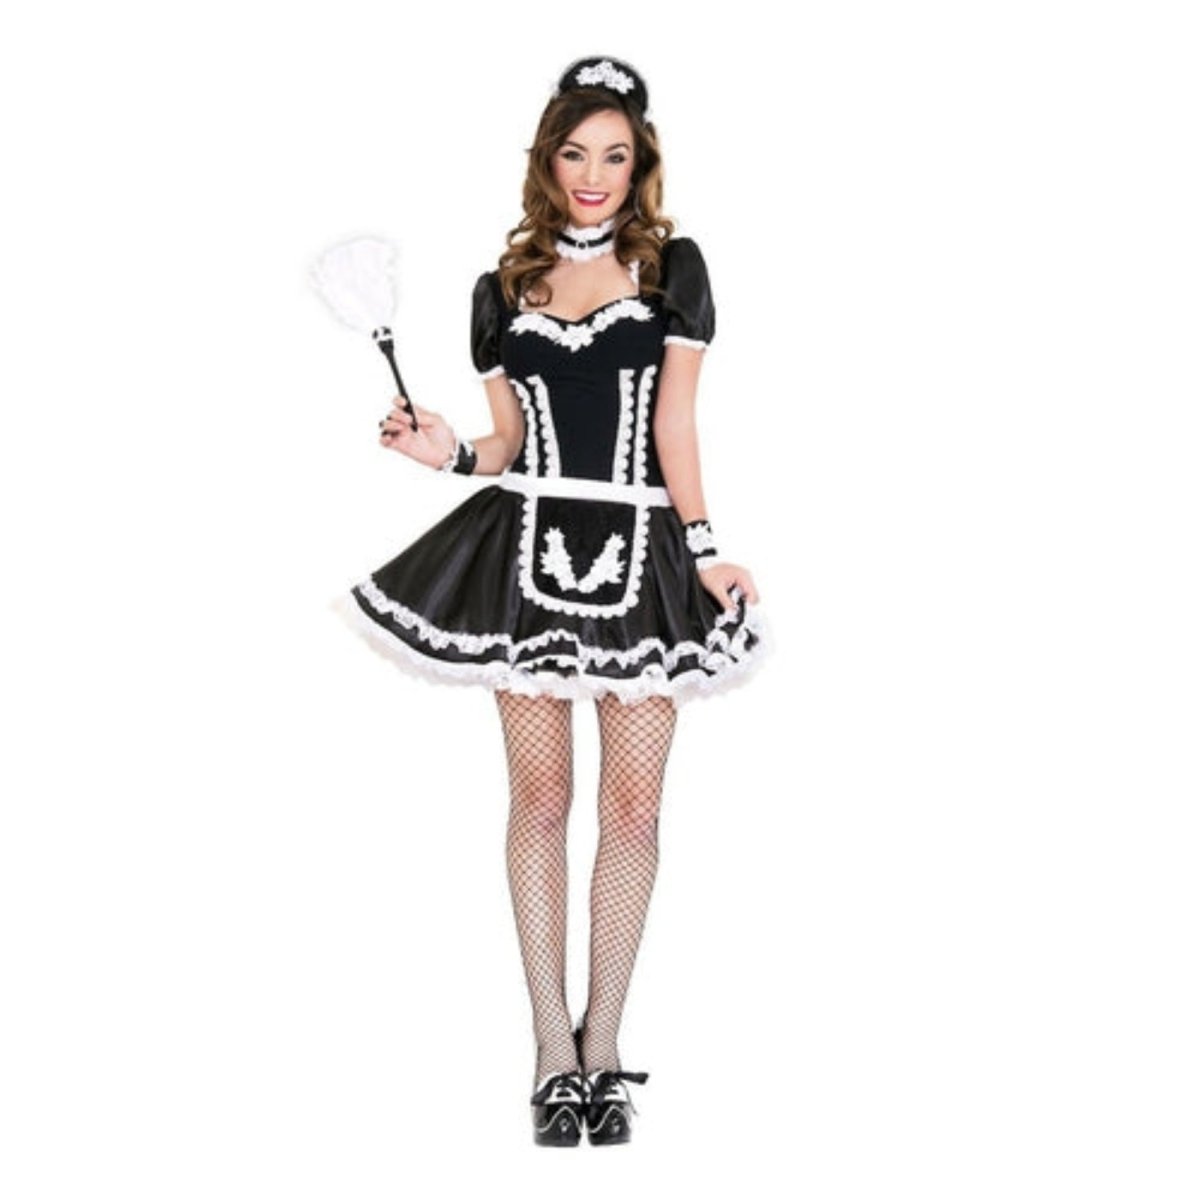 Flowery Lacy French Maid - worldclasscostumes